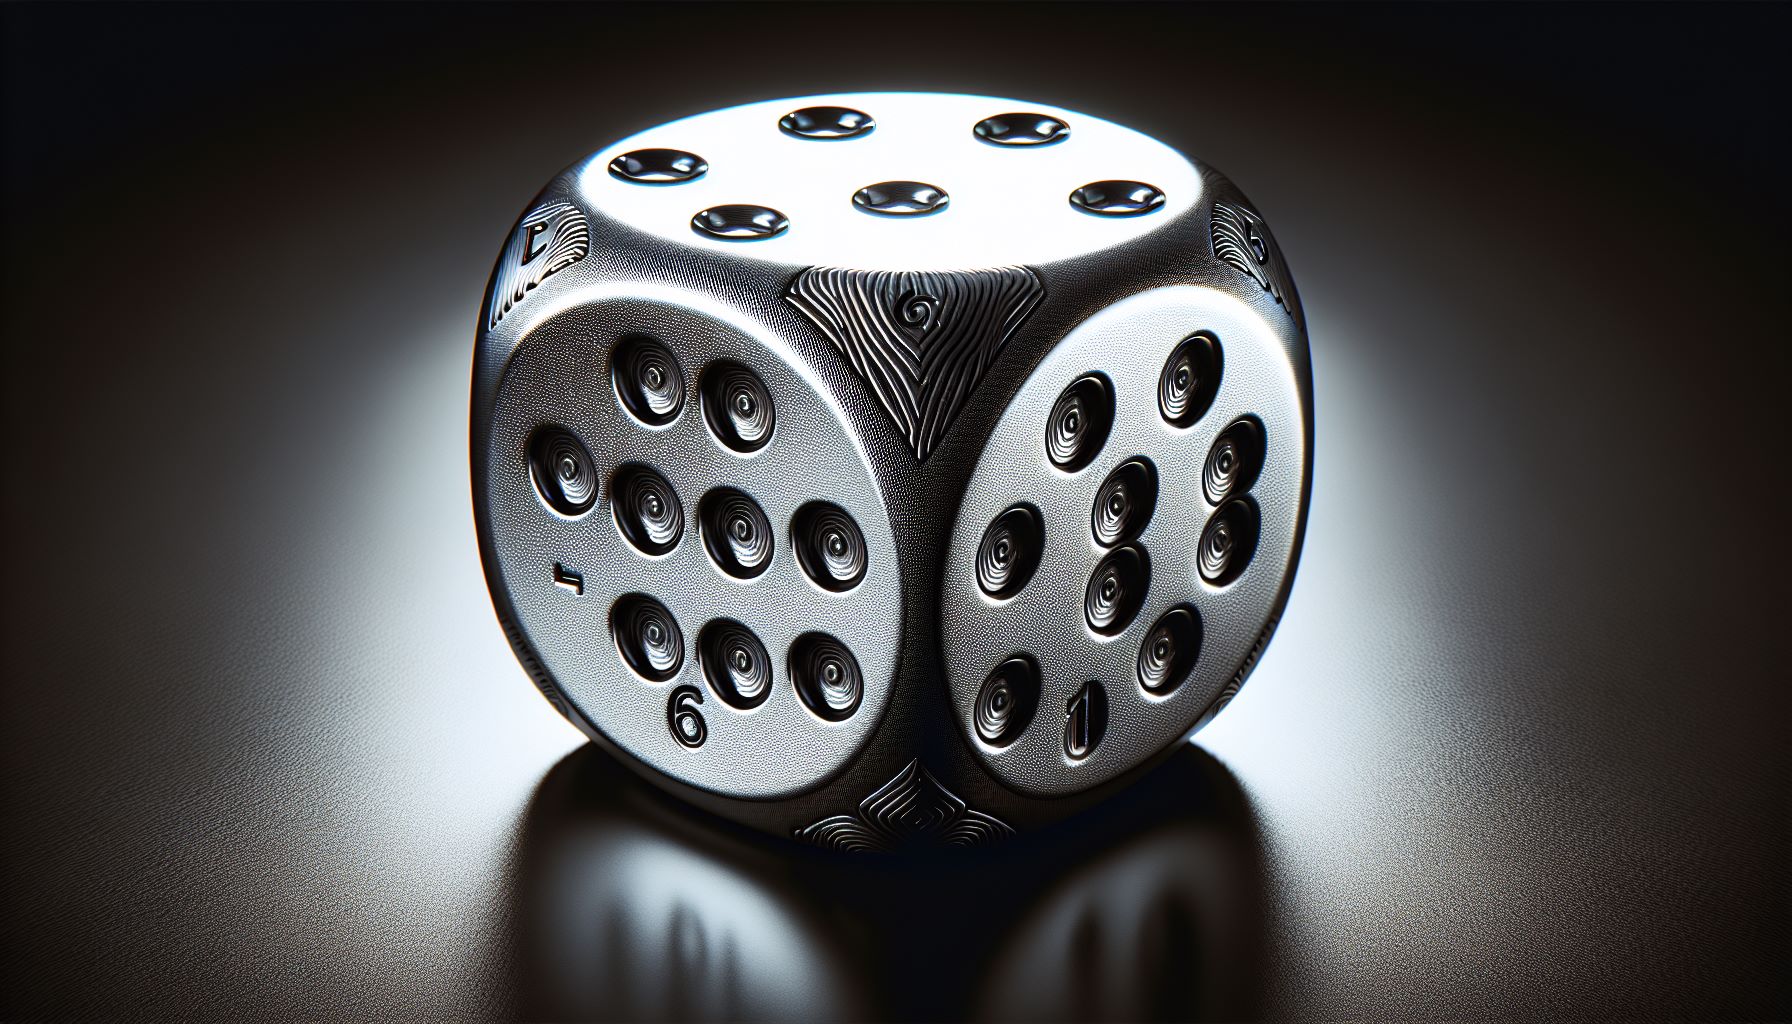 Illustration of a dice for random decision making